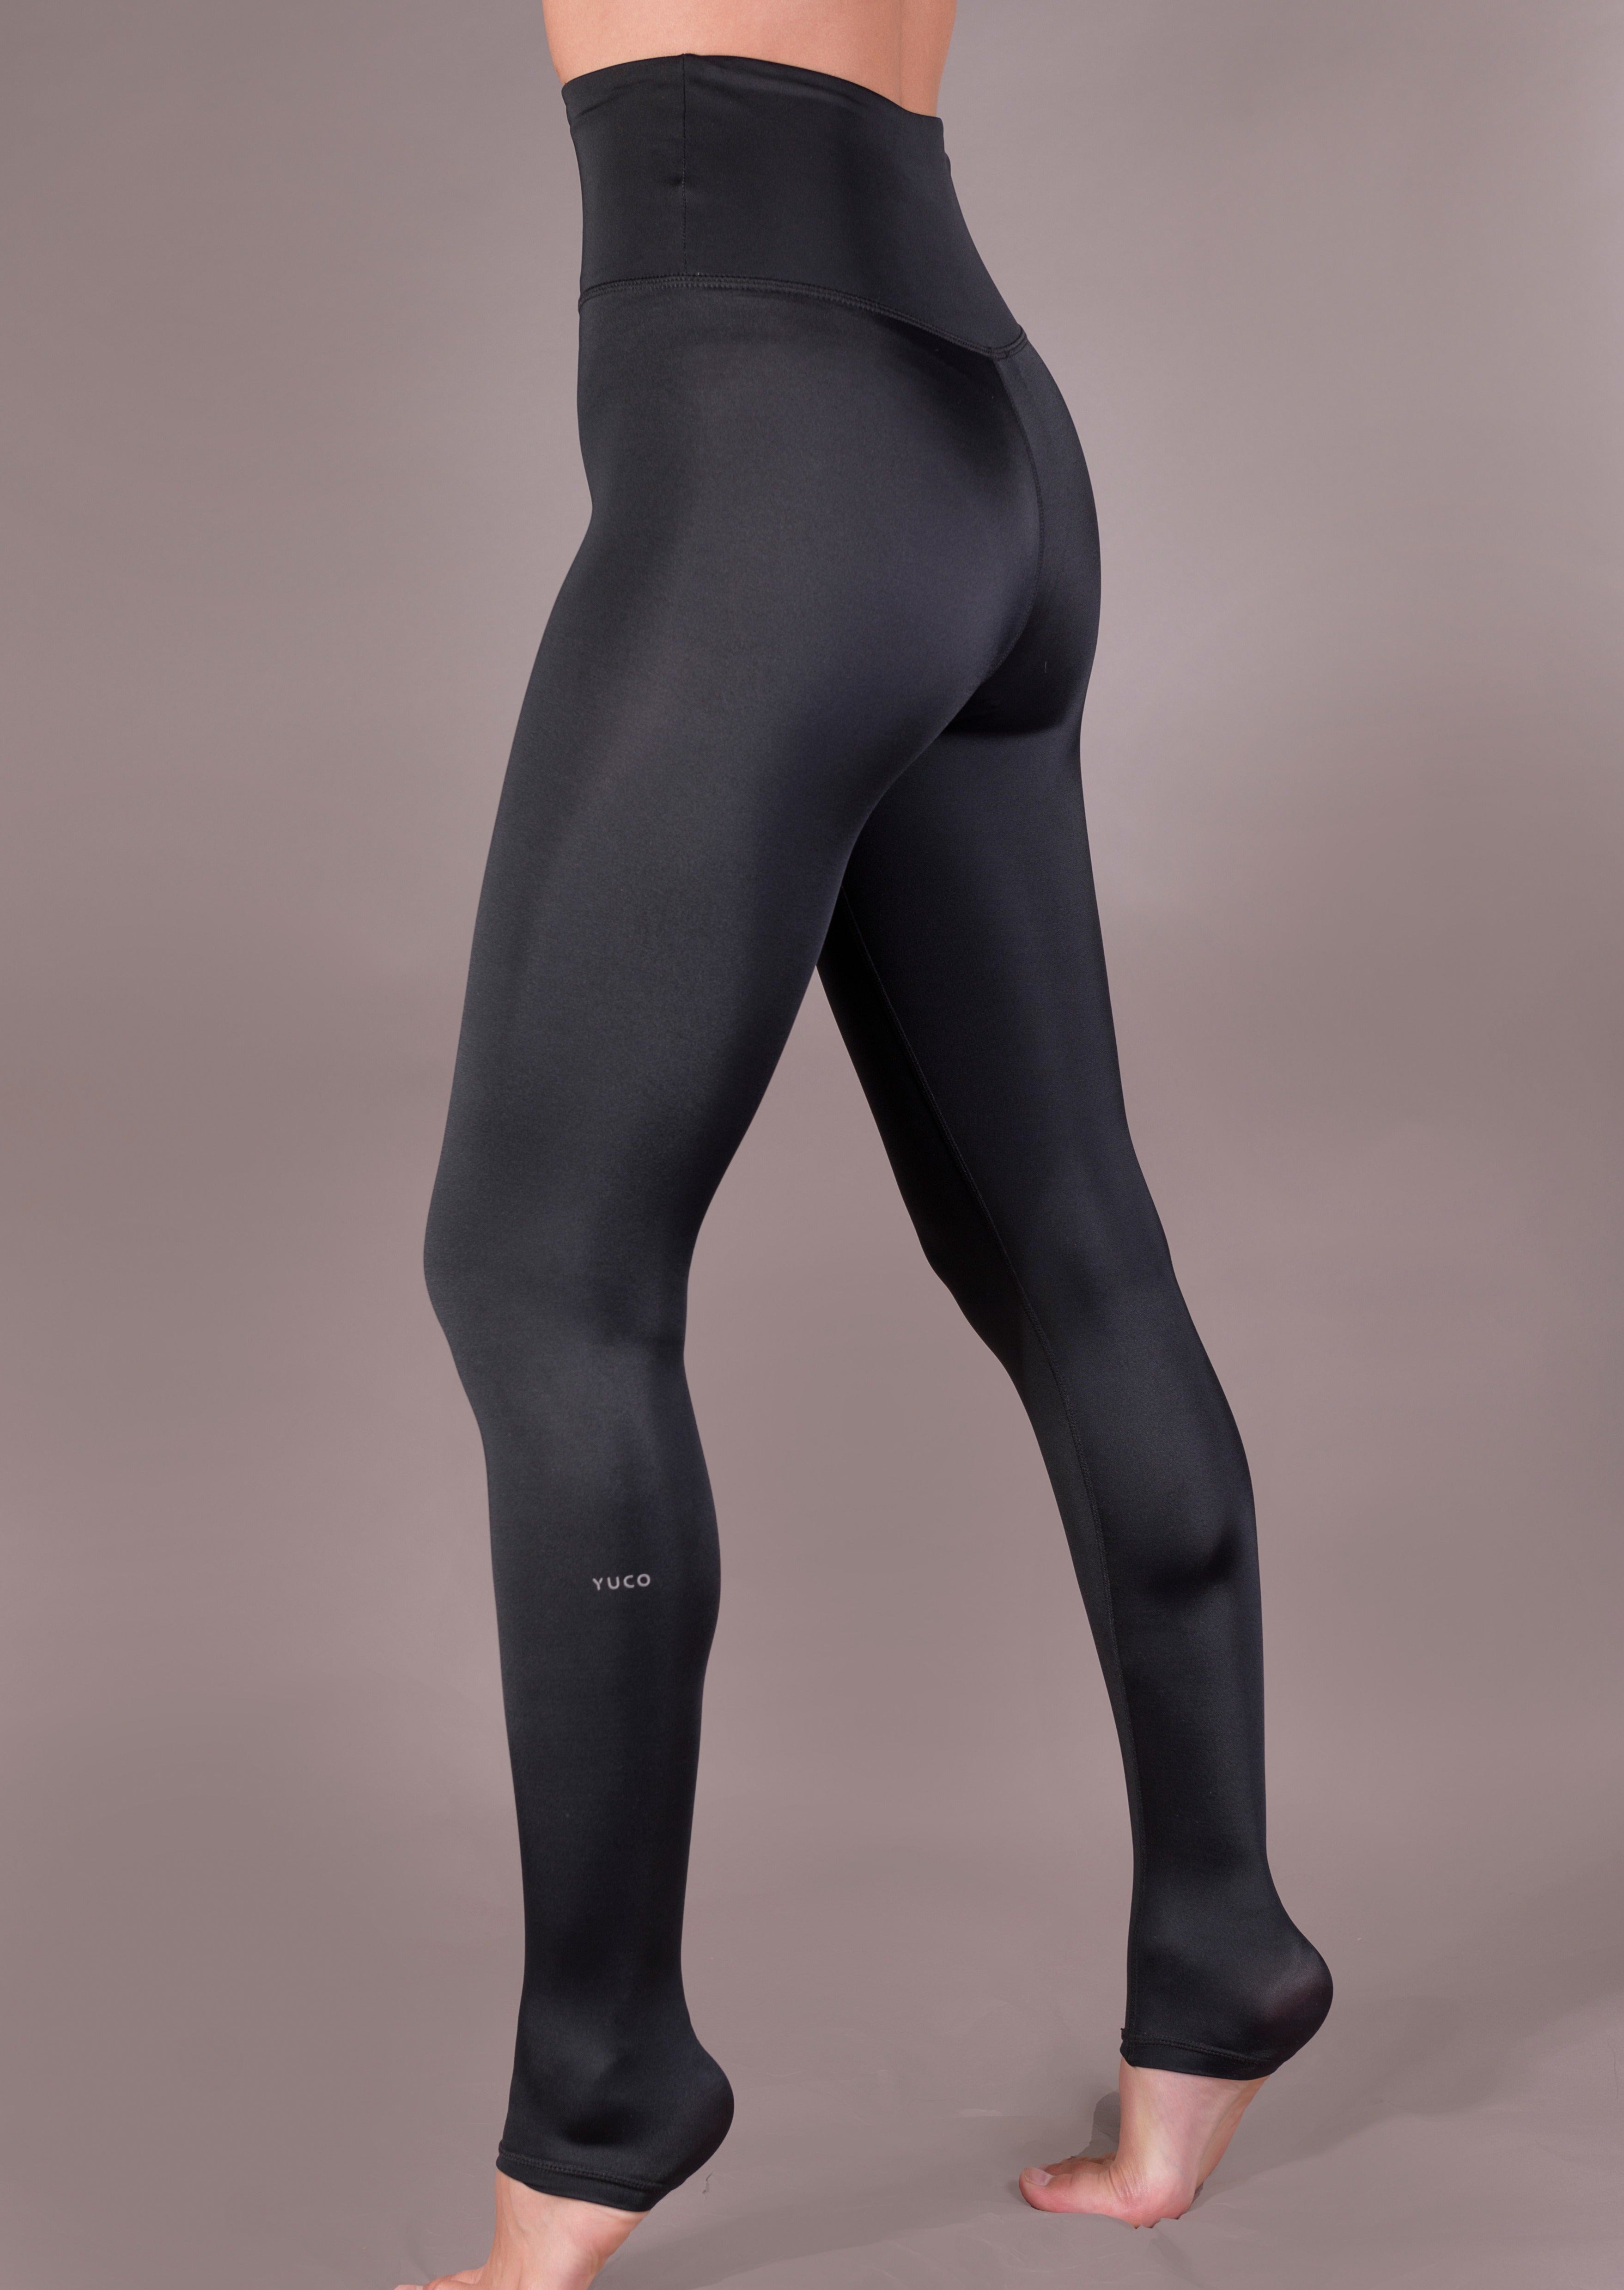 STAY COOL Light Shimmer FITNESS TIGHT Run Resistant Compression